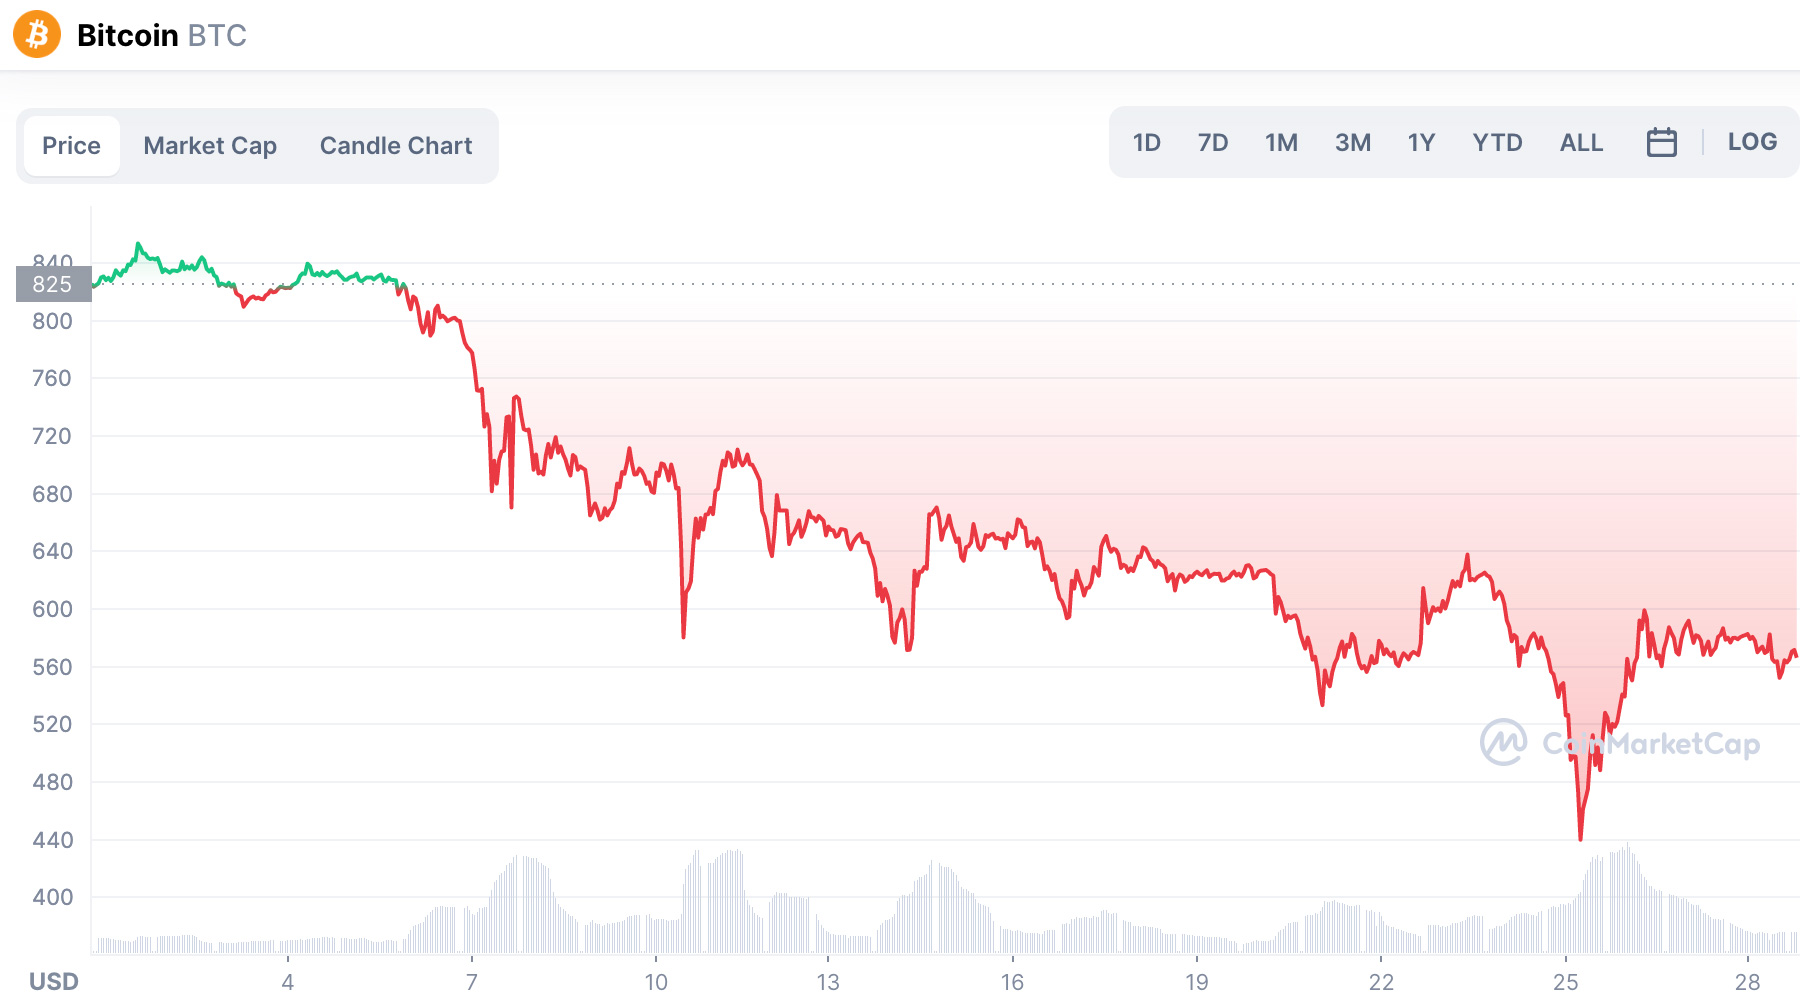 Bitcoin exchange rate in February 2014 during the fall of Mt.Gox